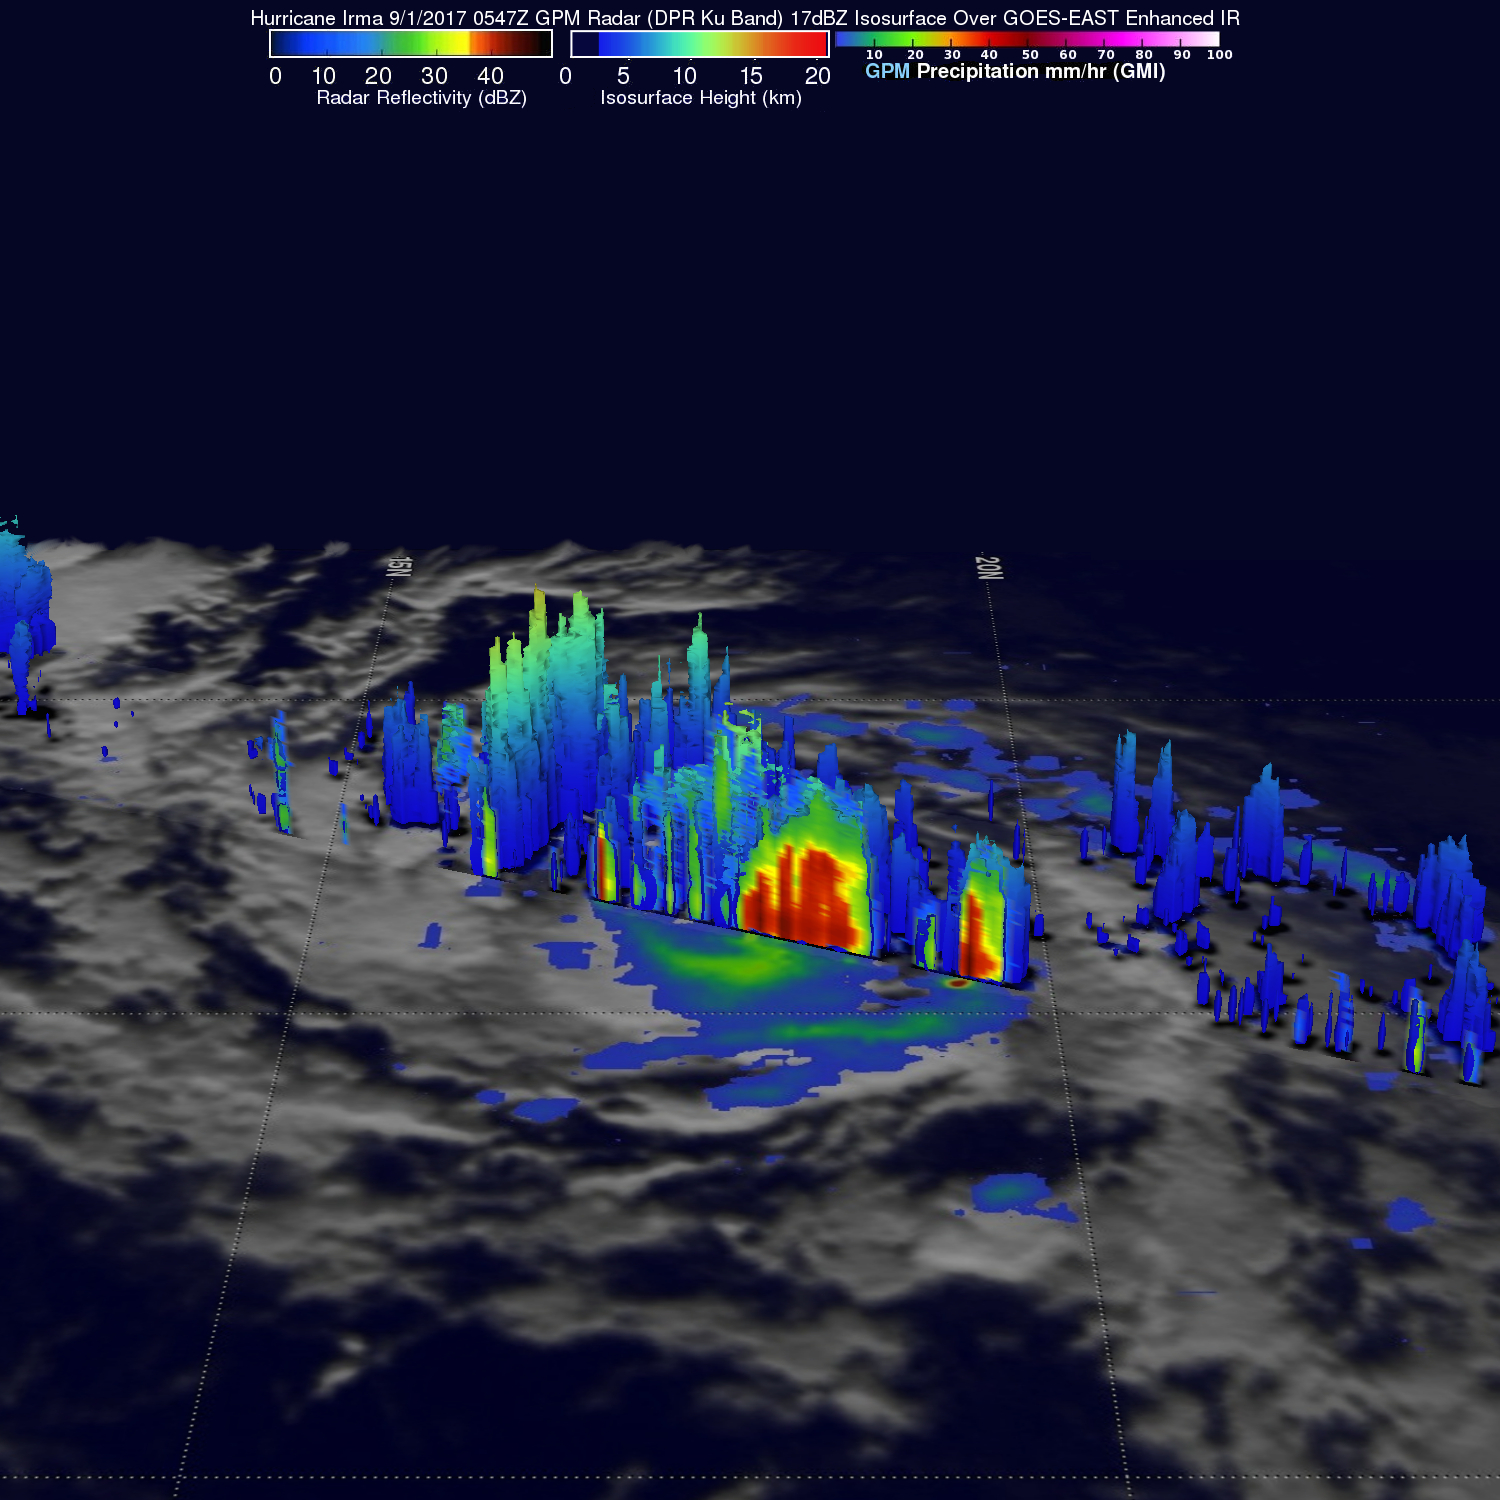 GPM image of Irma, with clouds in 3D and colored red, yellow, or blue to indicate temperature.